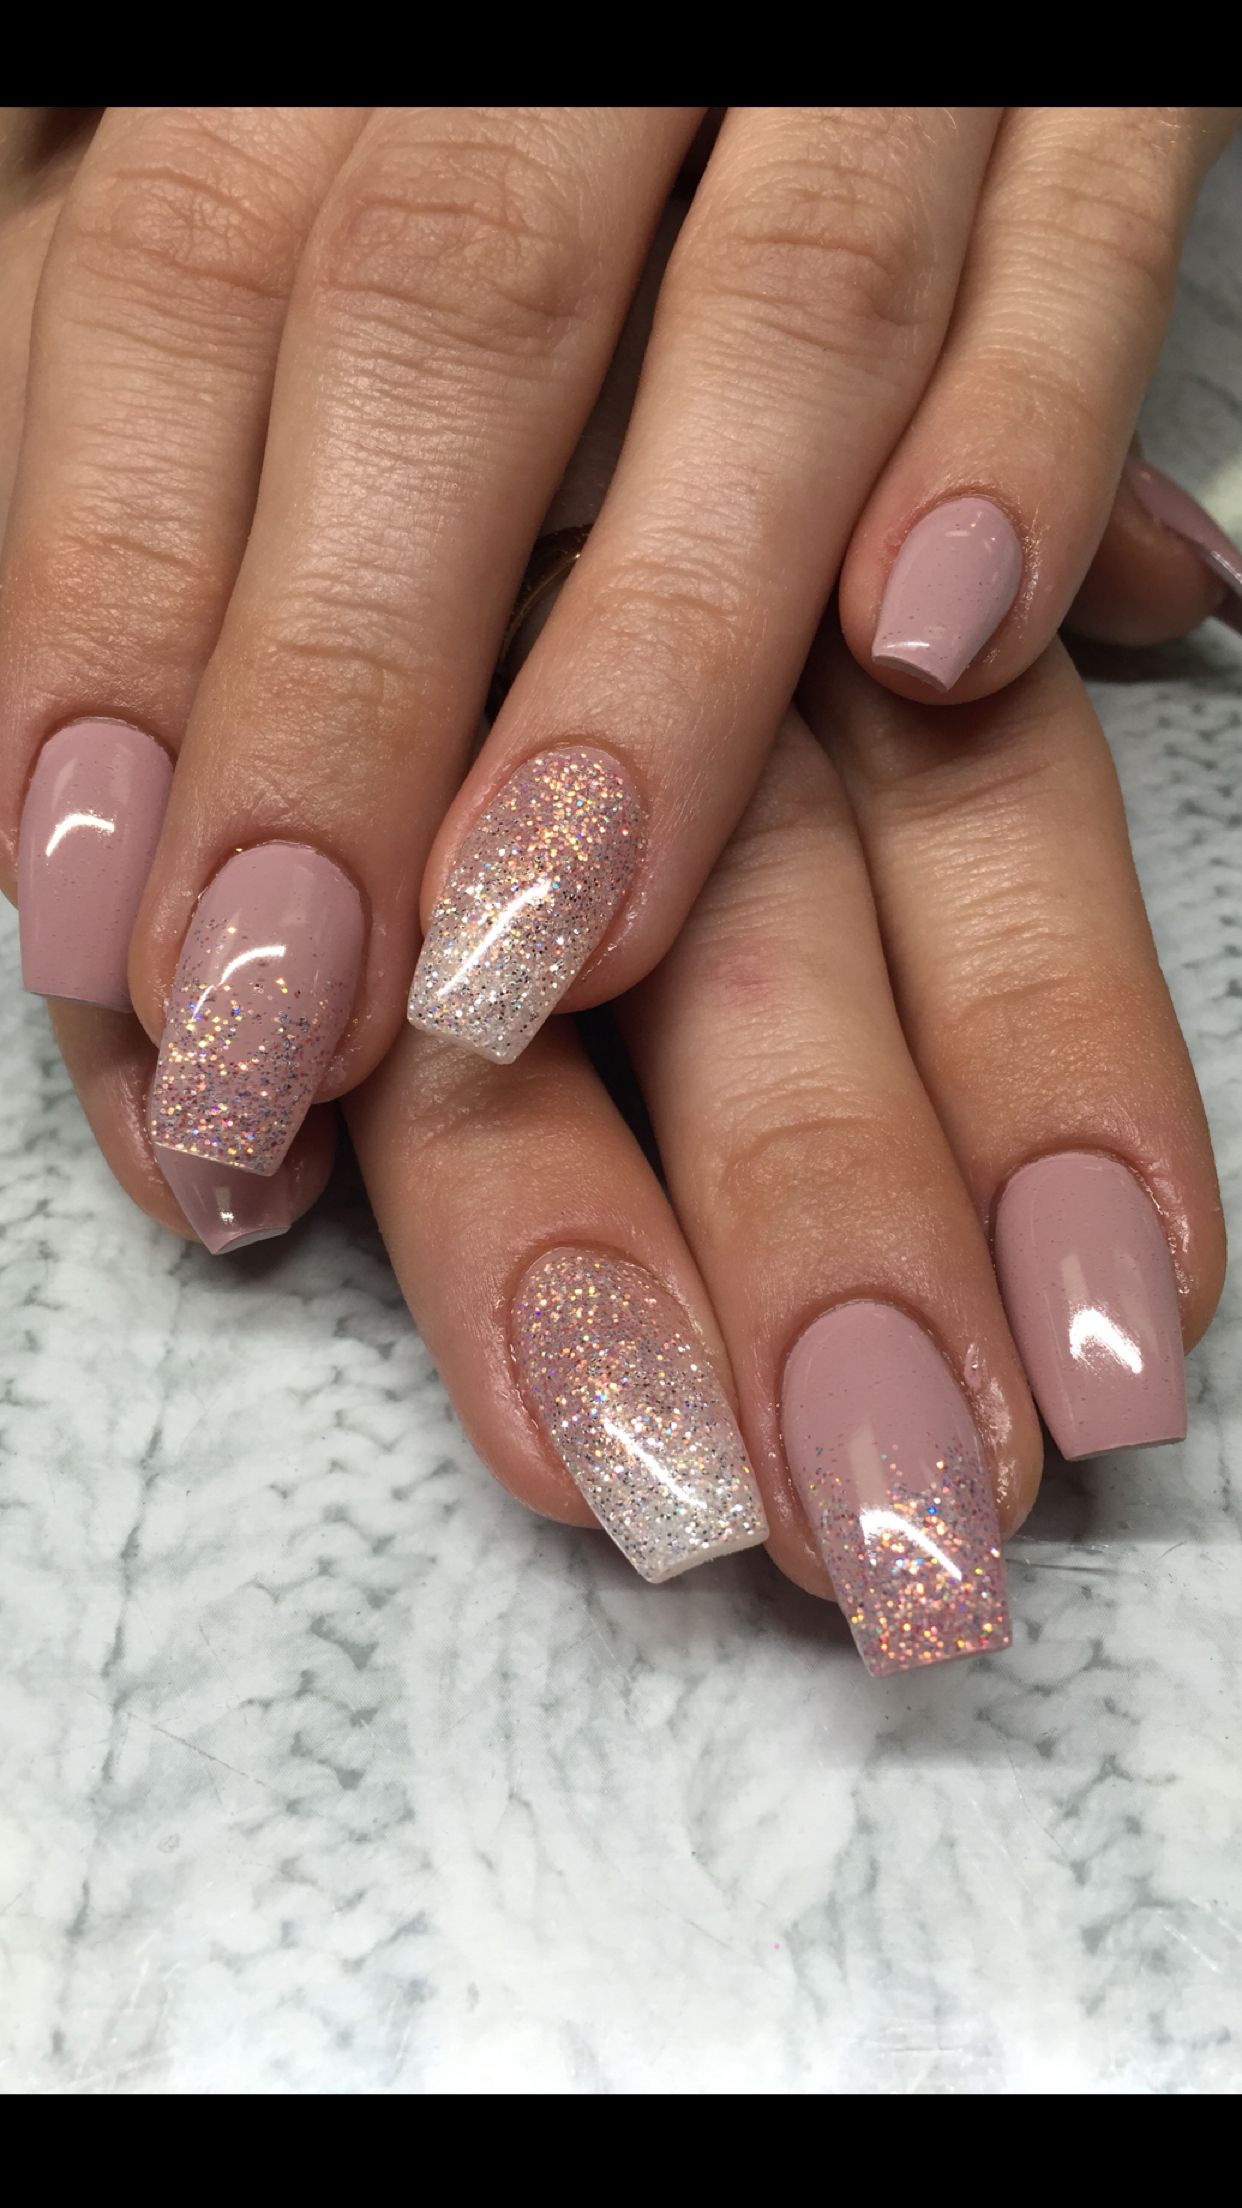 Hard Gel Nails Ballerina Coffin Light Elegance Your Churn With Sweet Nothing And Diamond Hard Gel Nails Gel Nails Trendy Nails